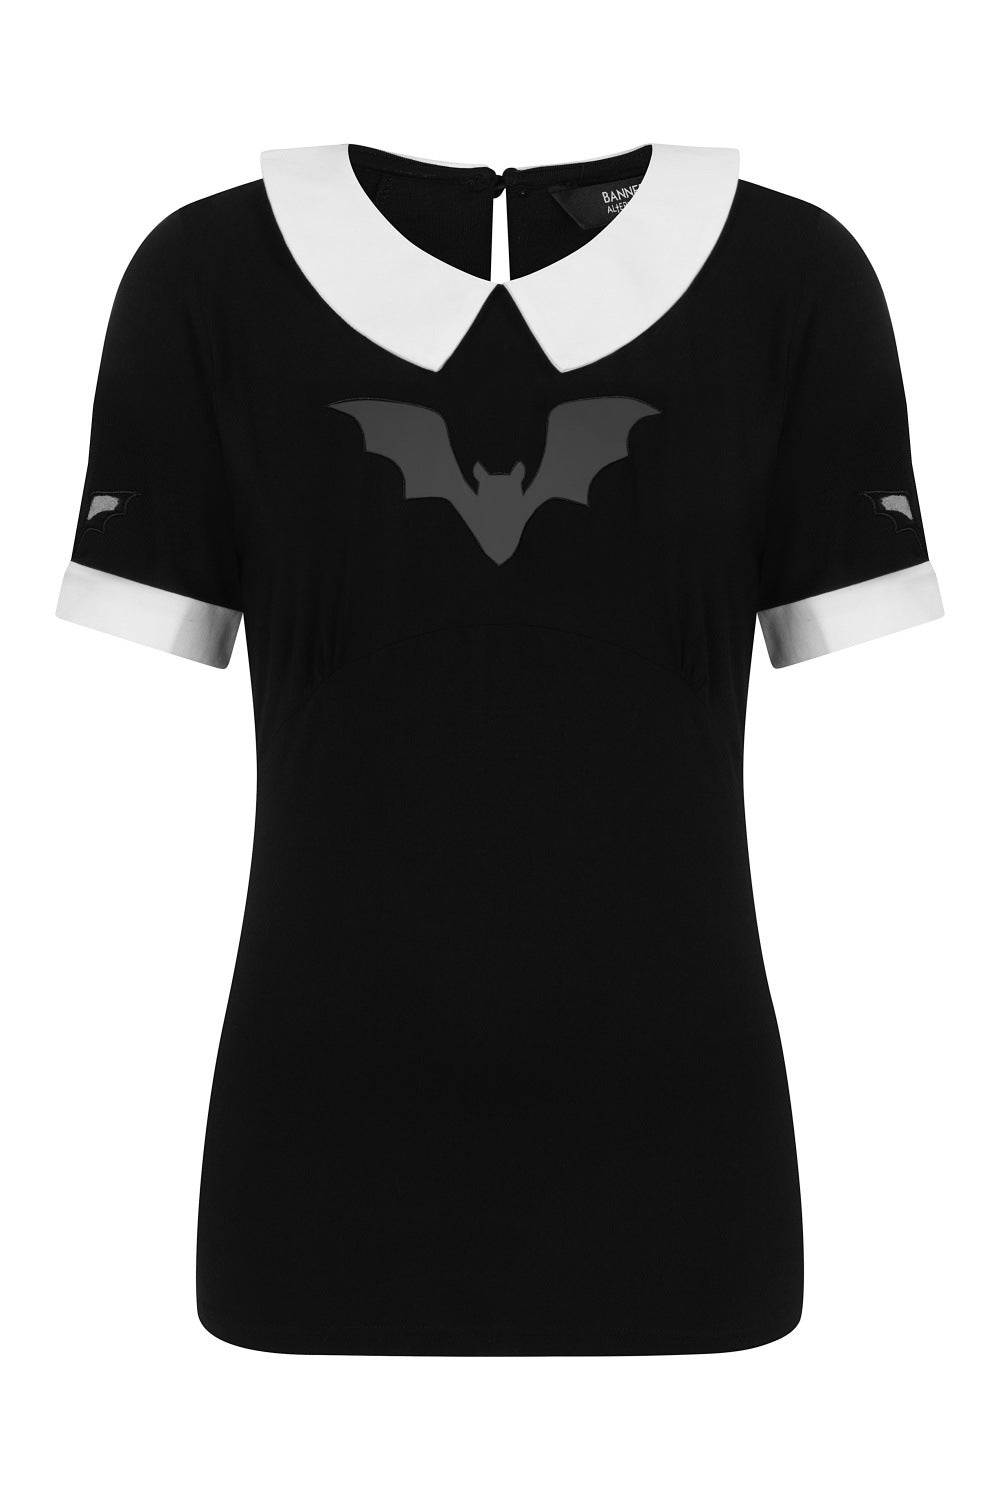 Black short sleeve top with white collar and cuff. Black mesh bat shaped panel on the chest. 